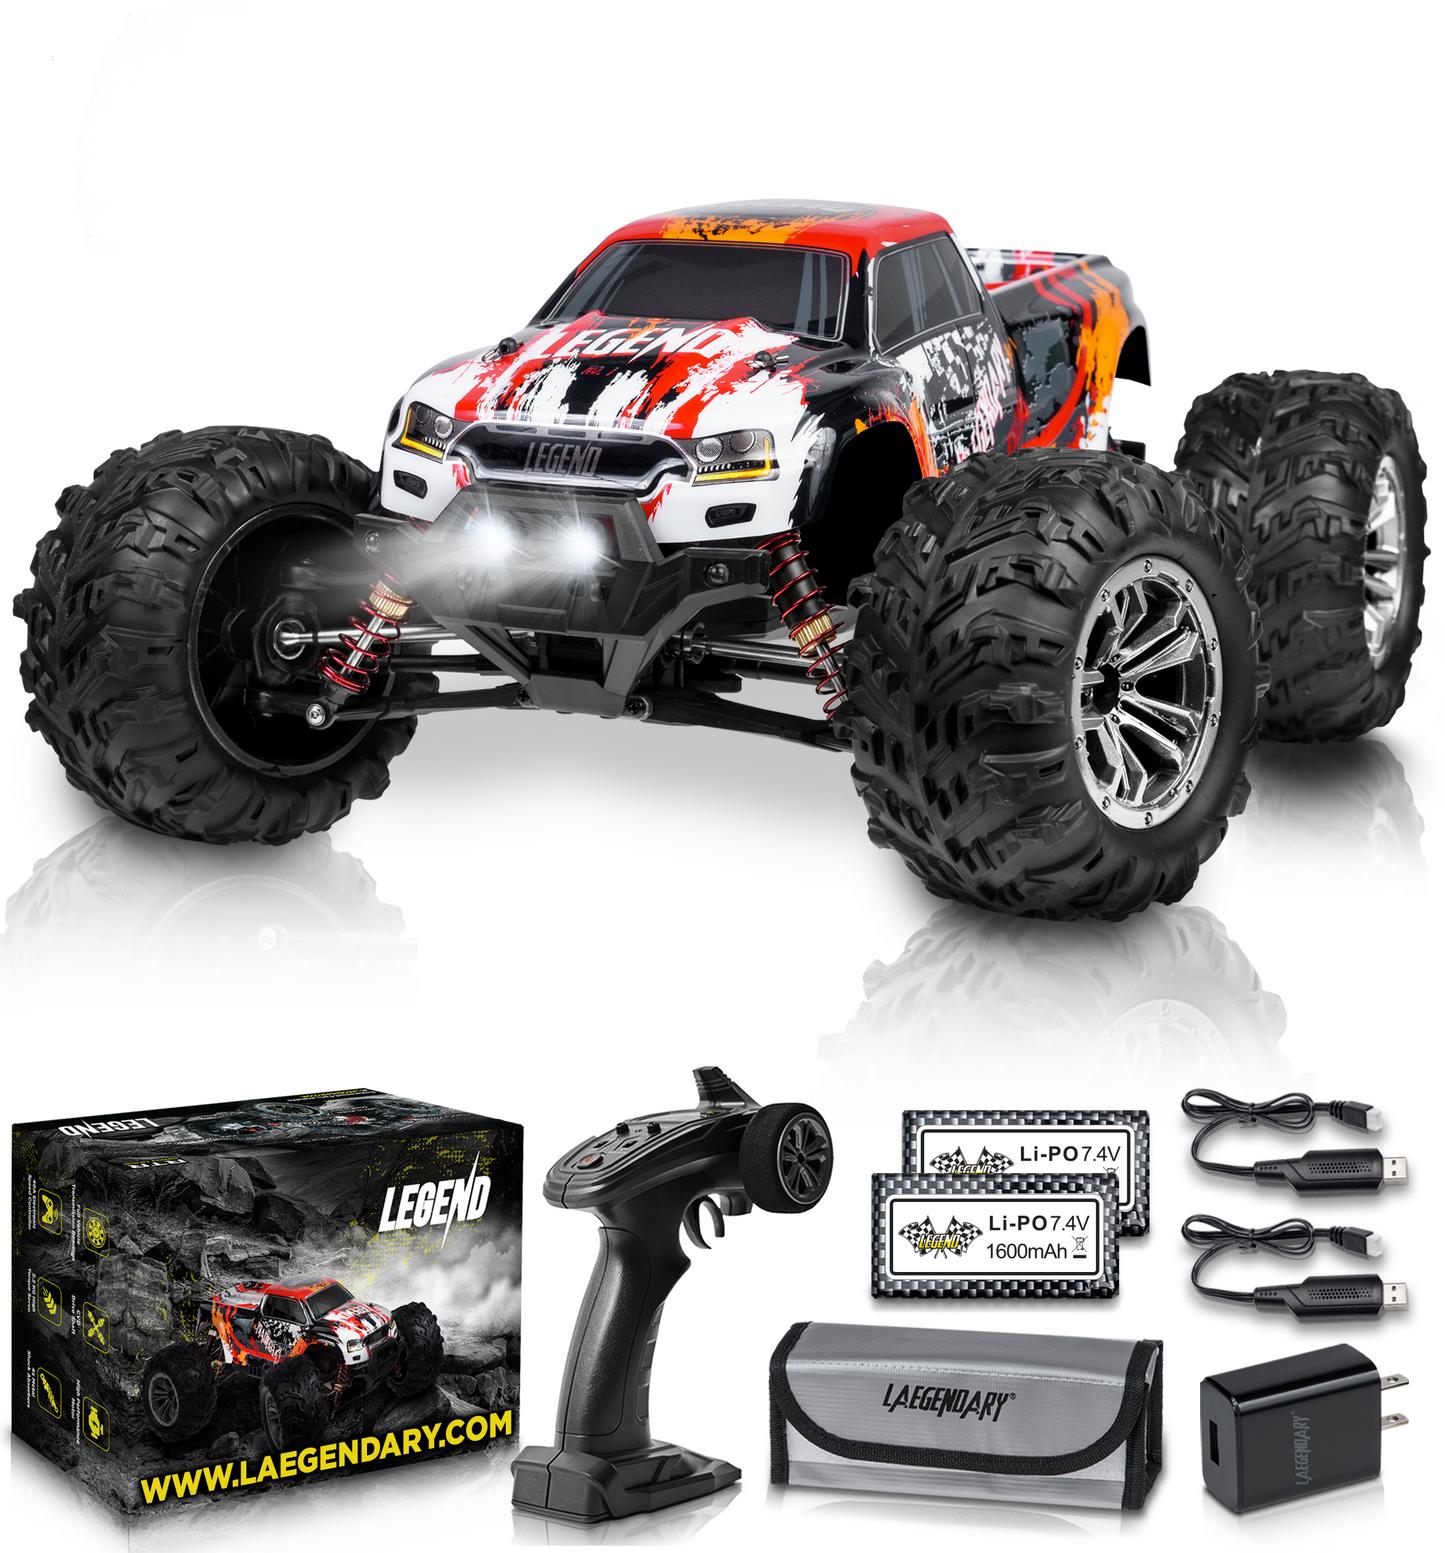 Legendary Rc Cars: Discover the Top Modern Legendary RC Cars